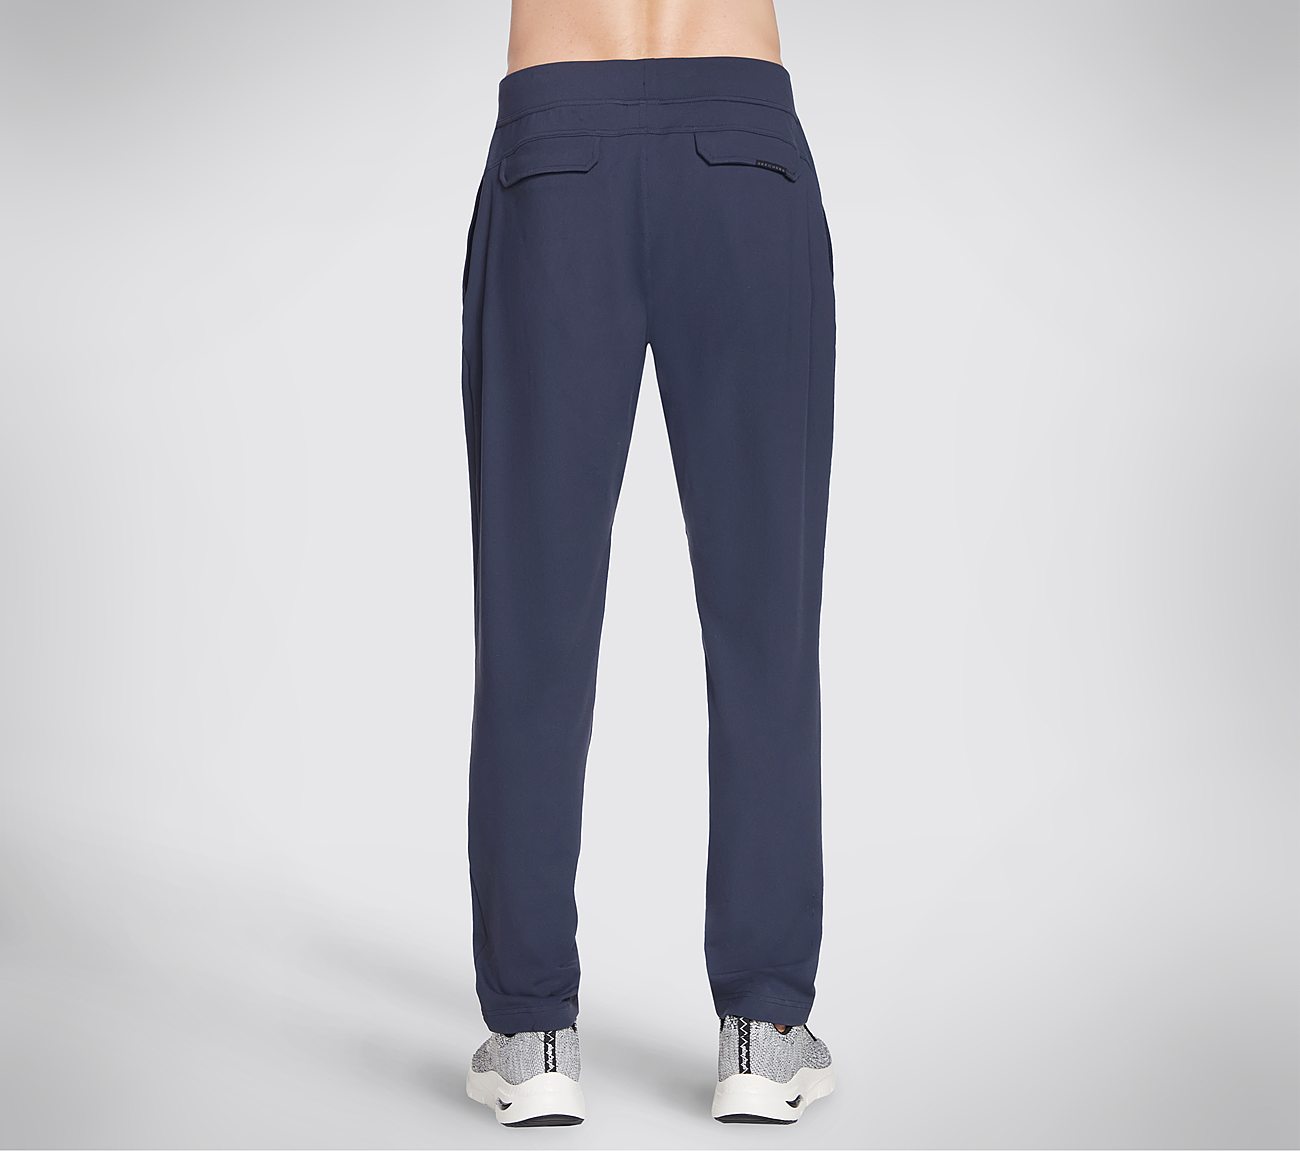 THE GOWALK PANT RECHARGE, NNNAVY Apparel Top View